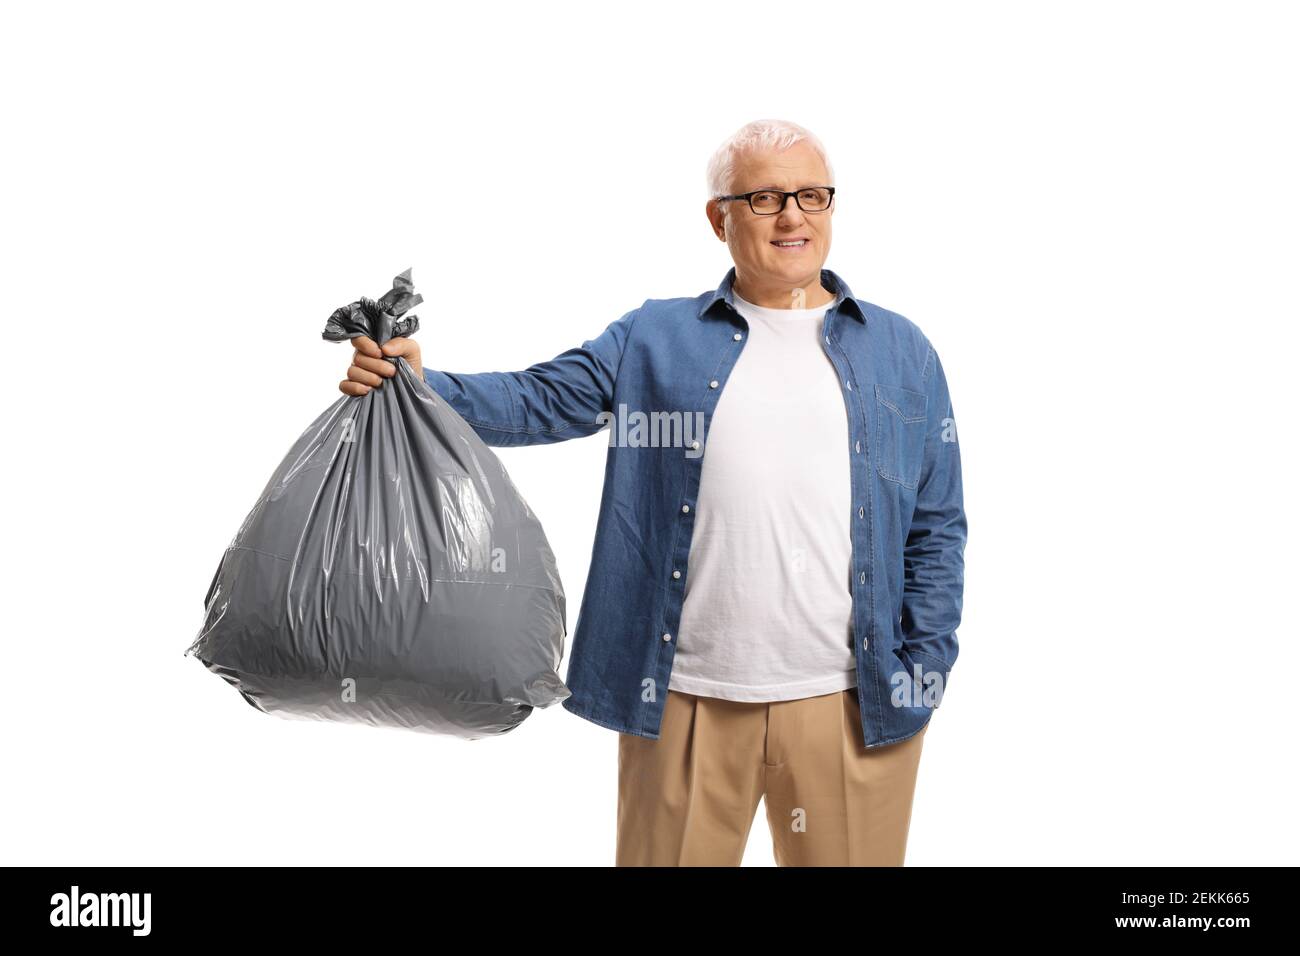 Mature man holding a bin bag isolated on white background Stock Photo